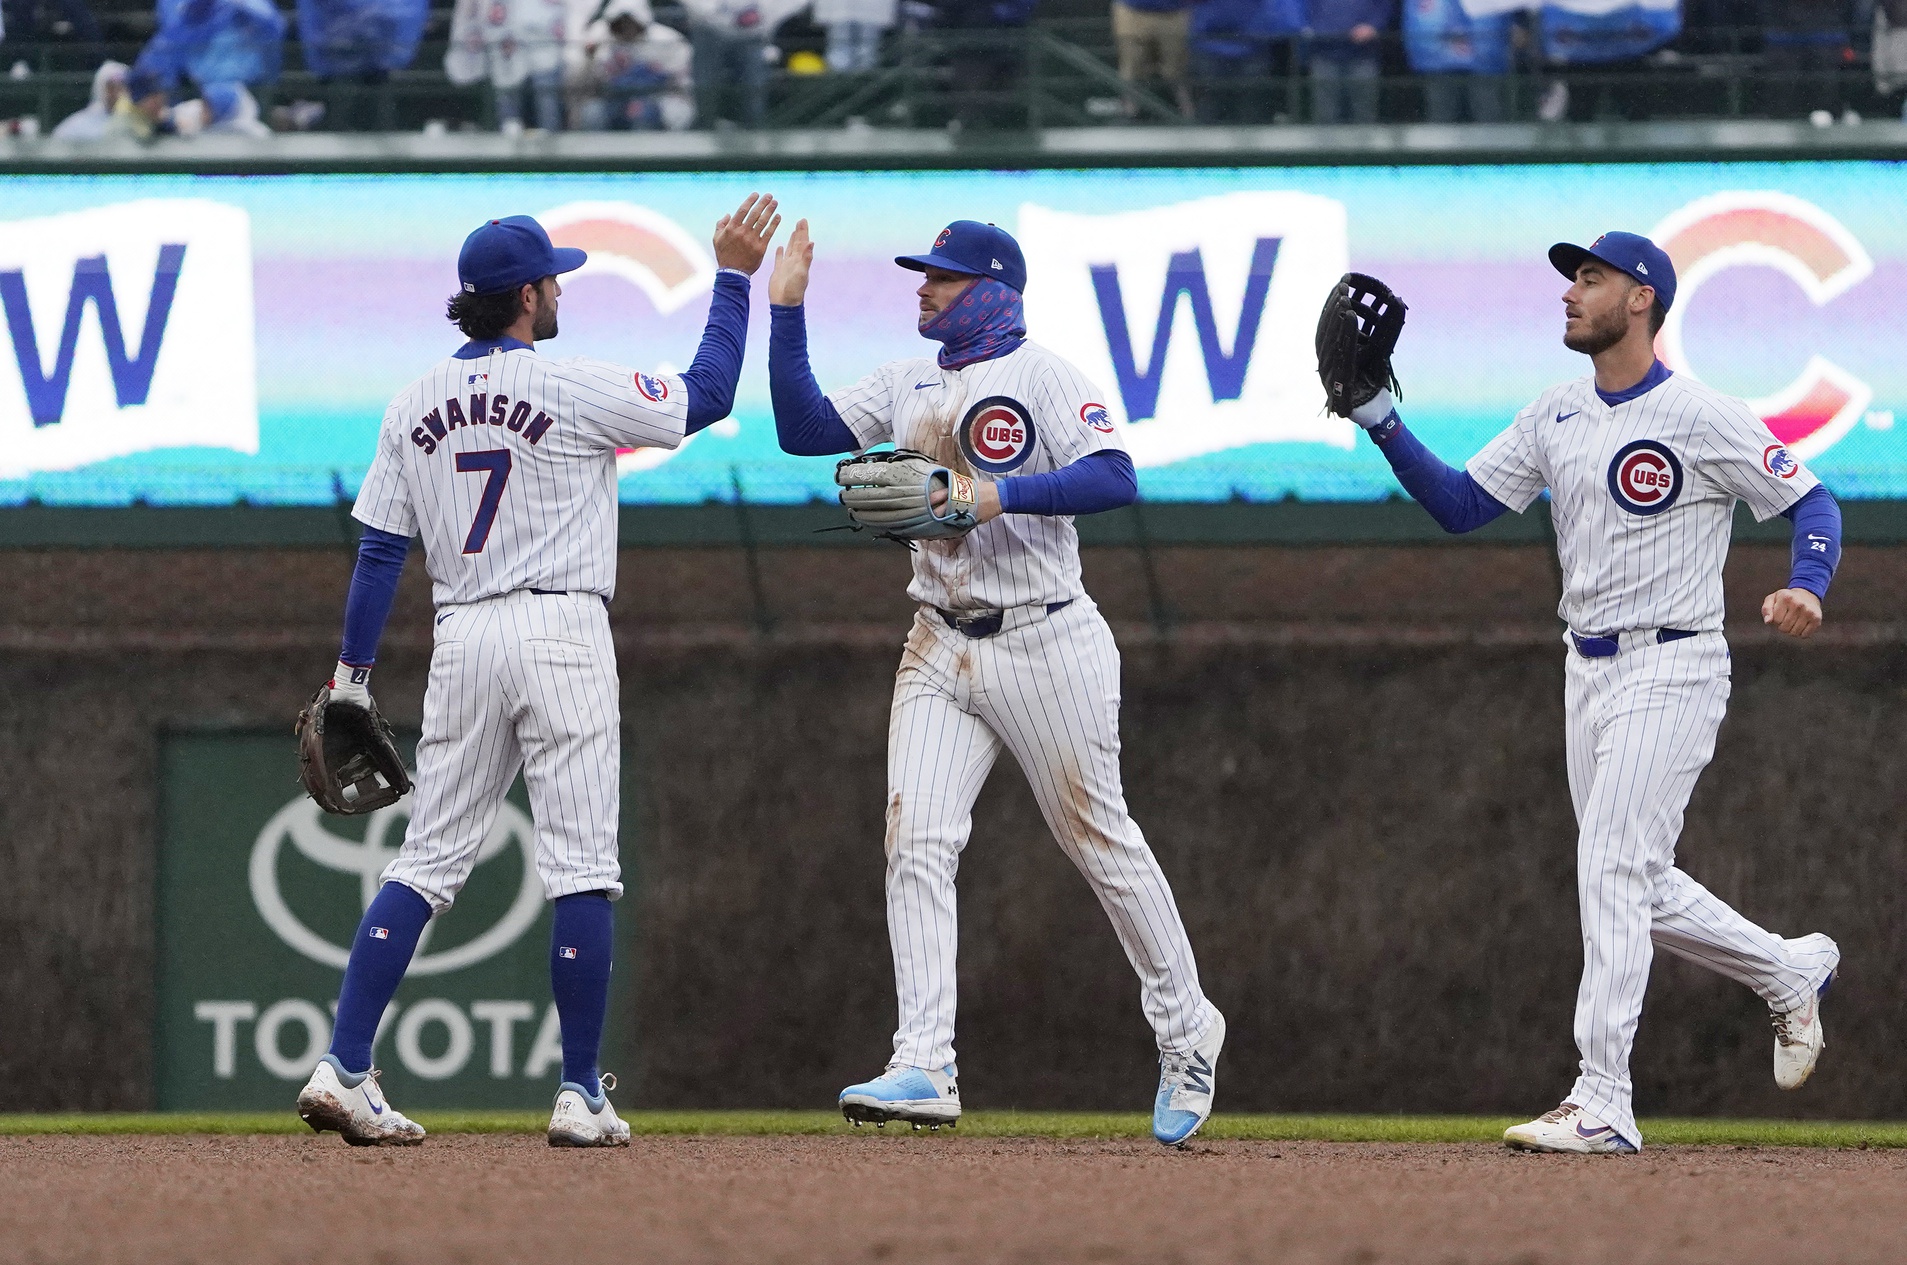 Cubs Slugger Headed to IL with Fractured Ribs